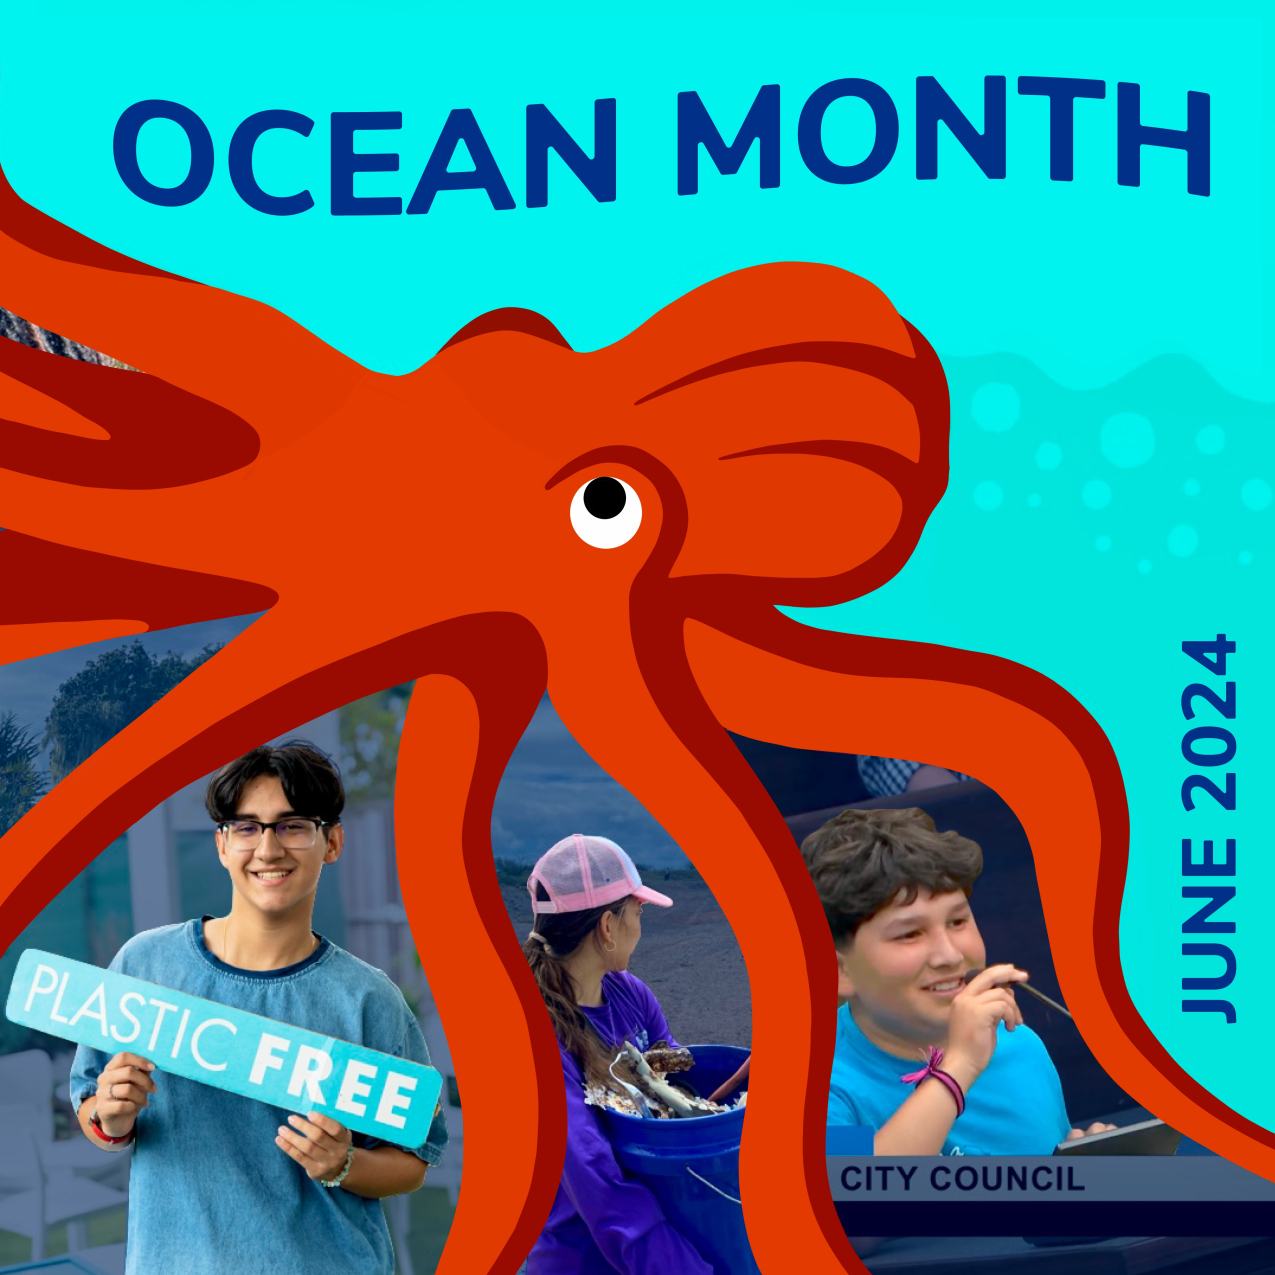 A graphic of an octopus across the image. In the cutouts between each of its arms are images of participants of education programs including students cleaning up trash from beaches and learning in classrooms. To the side, there is the text "Ocean Month June 2024."